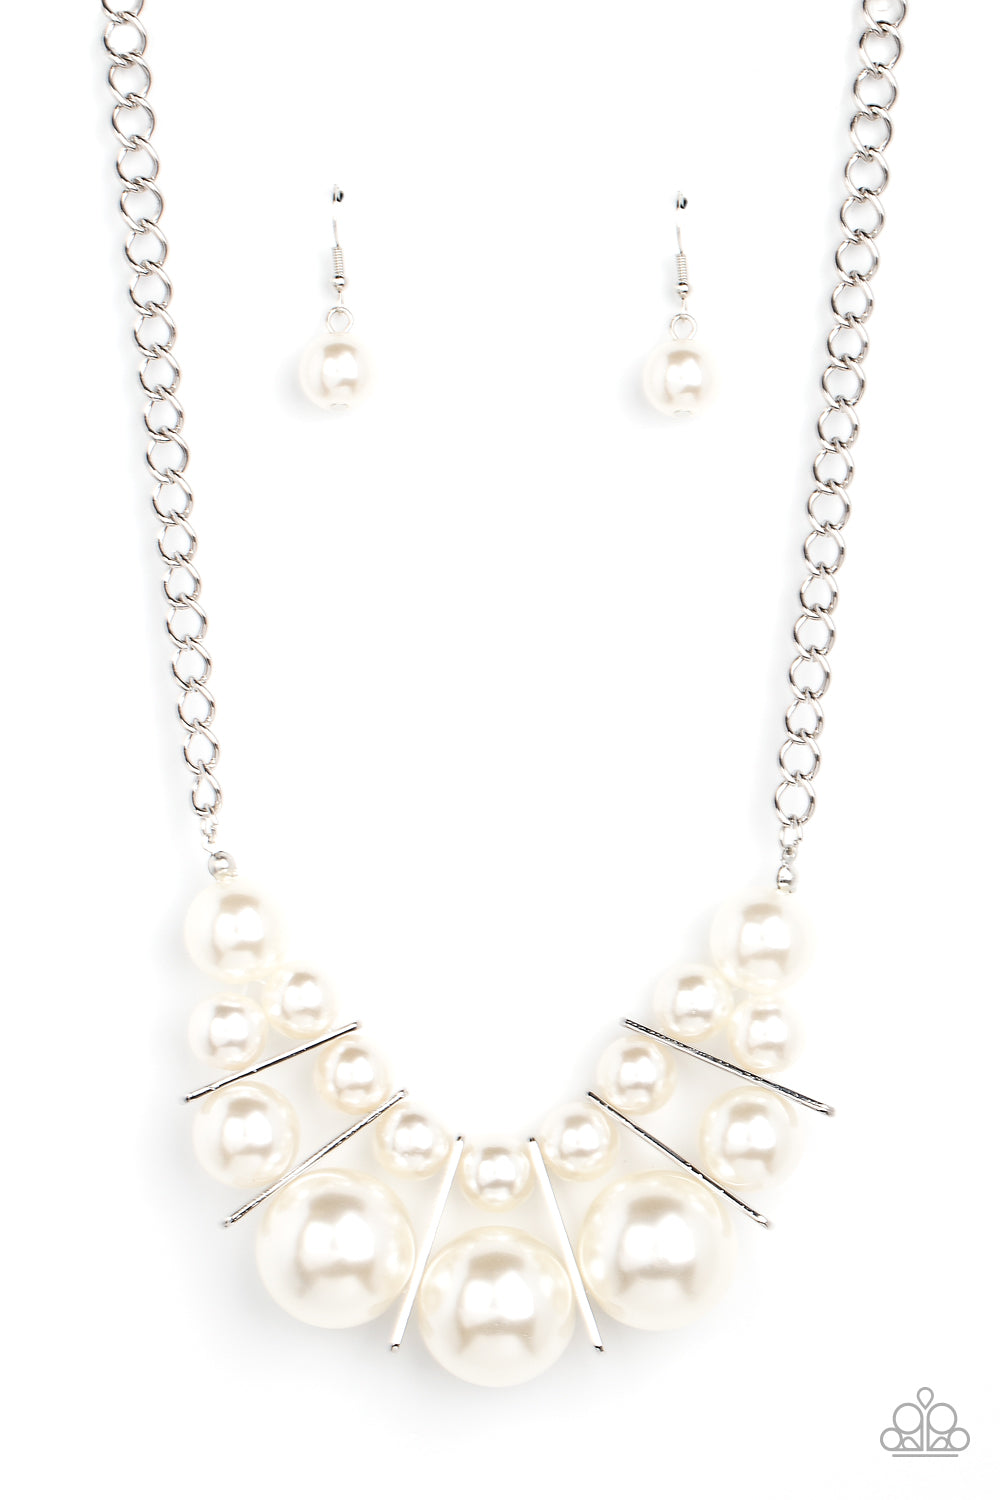 Challenge Accepted White Pearl Necklace - Paparazzi Accessories  Separated by rectangular silver frames, bubbly rows of classic and oversized white pearls are threaded along invisible wires at the bottom of a chunky silver chain for an effervescent explosion below the collar. Features an adjustable clasp closure.  Sold as one individual necklace. Includes one pair of matching earrings.